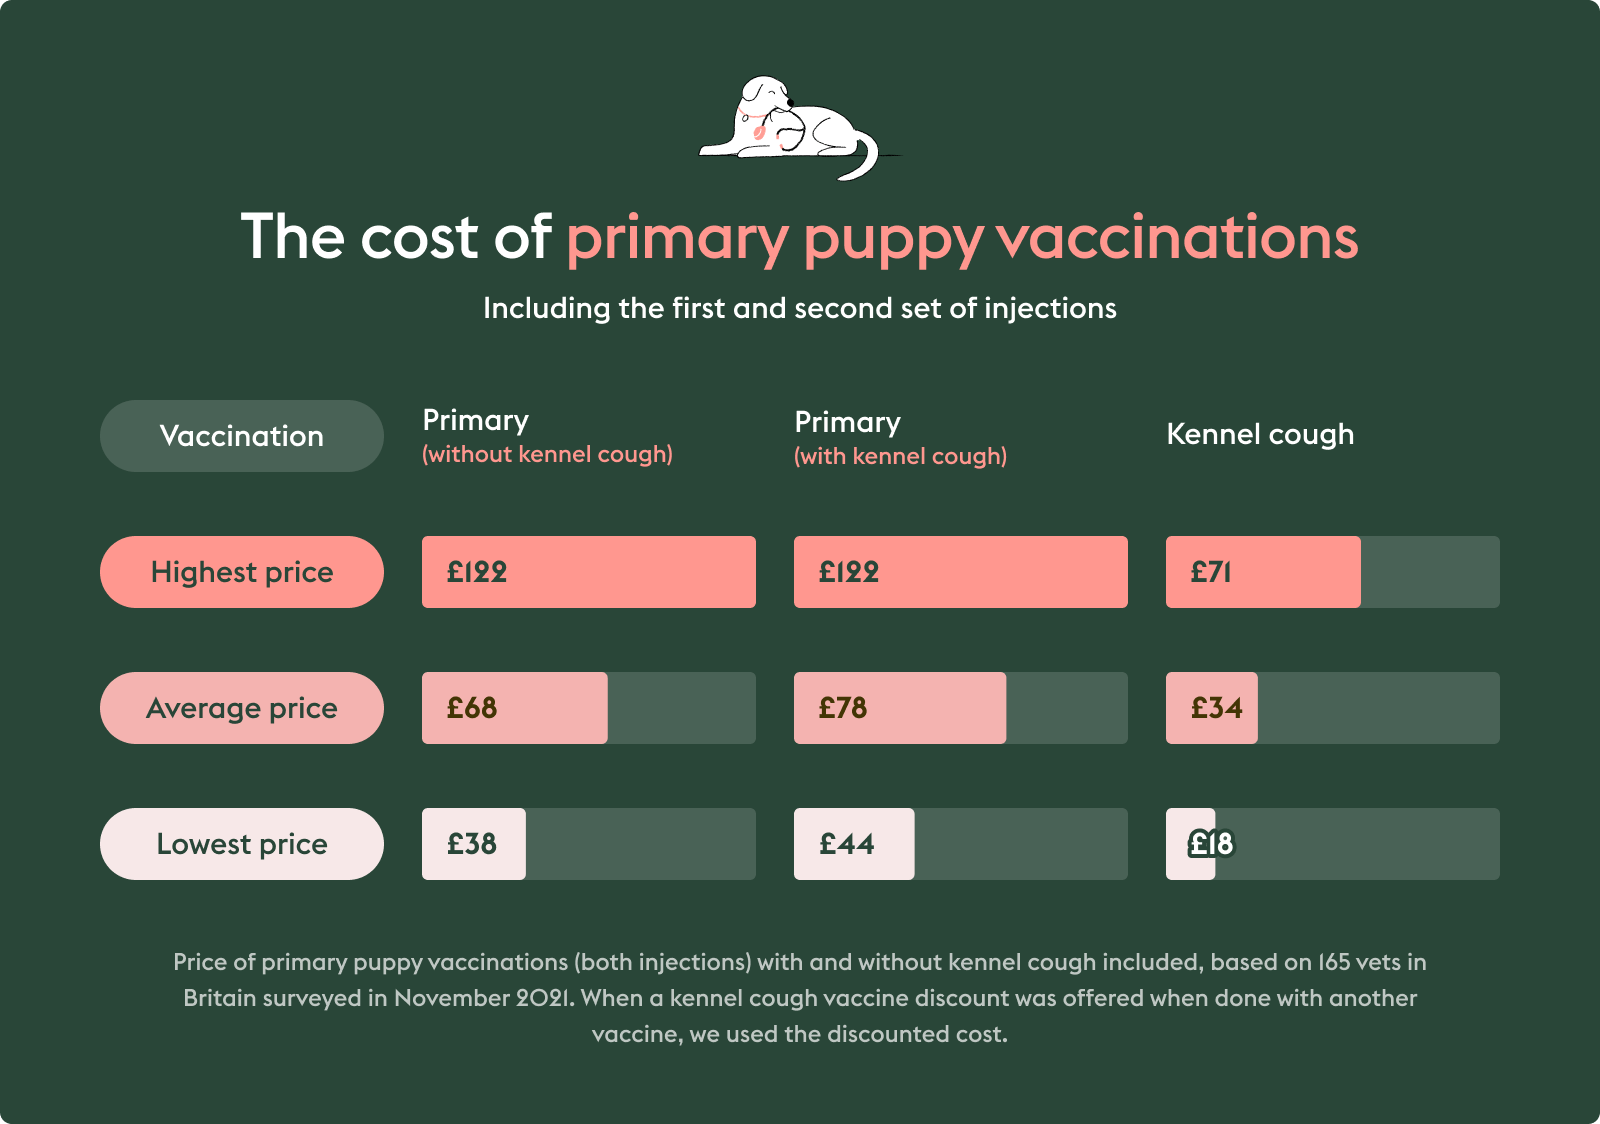 Puppy vaccination costs